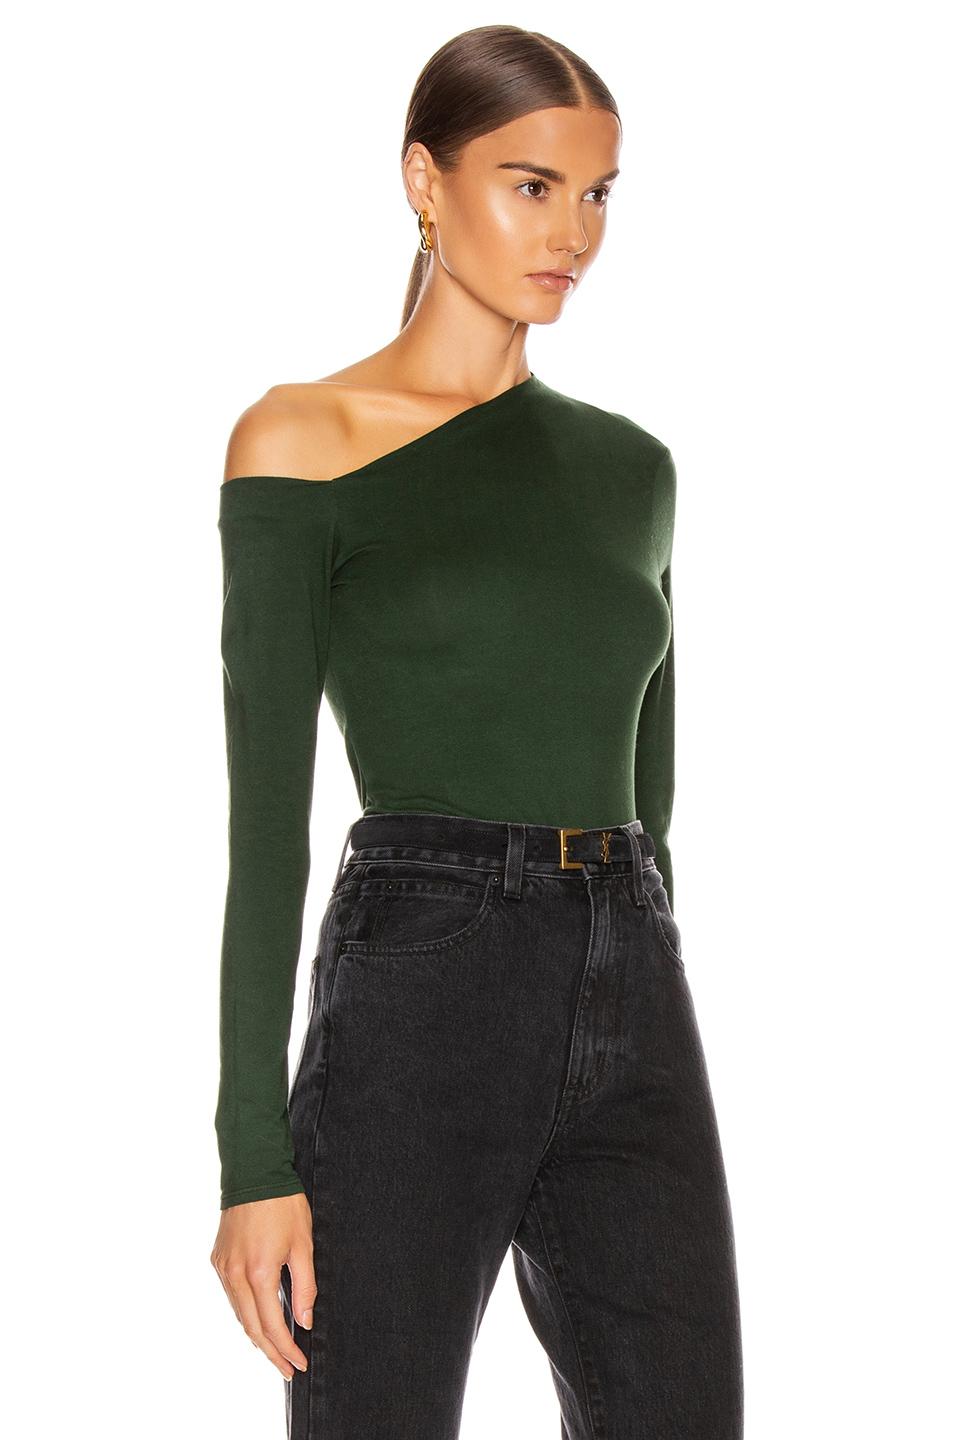 Enza Costa Synthetic Angled Exposed Shoulder Long Sleeve Top in Green ...